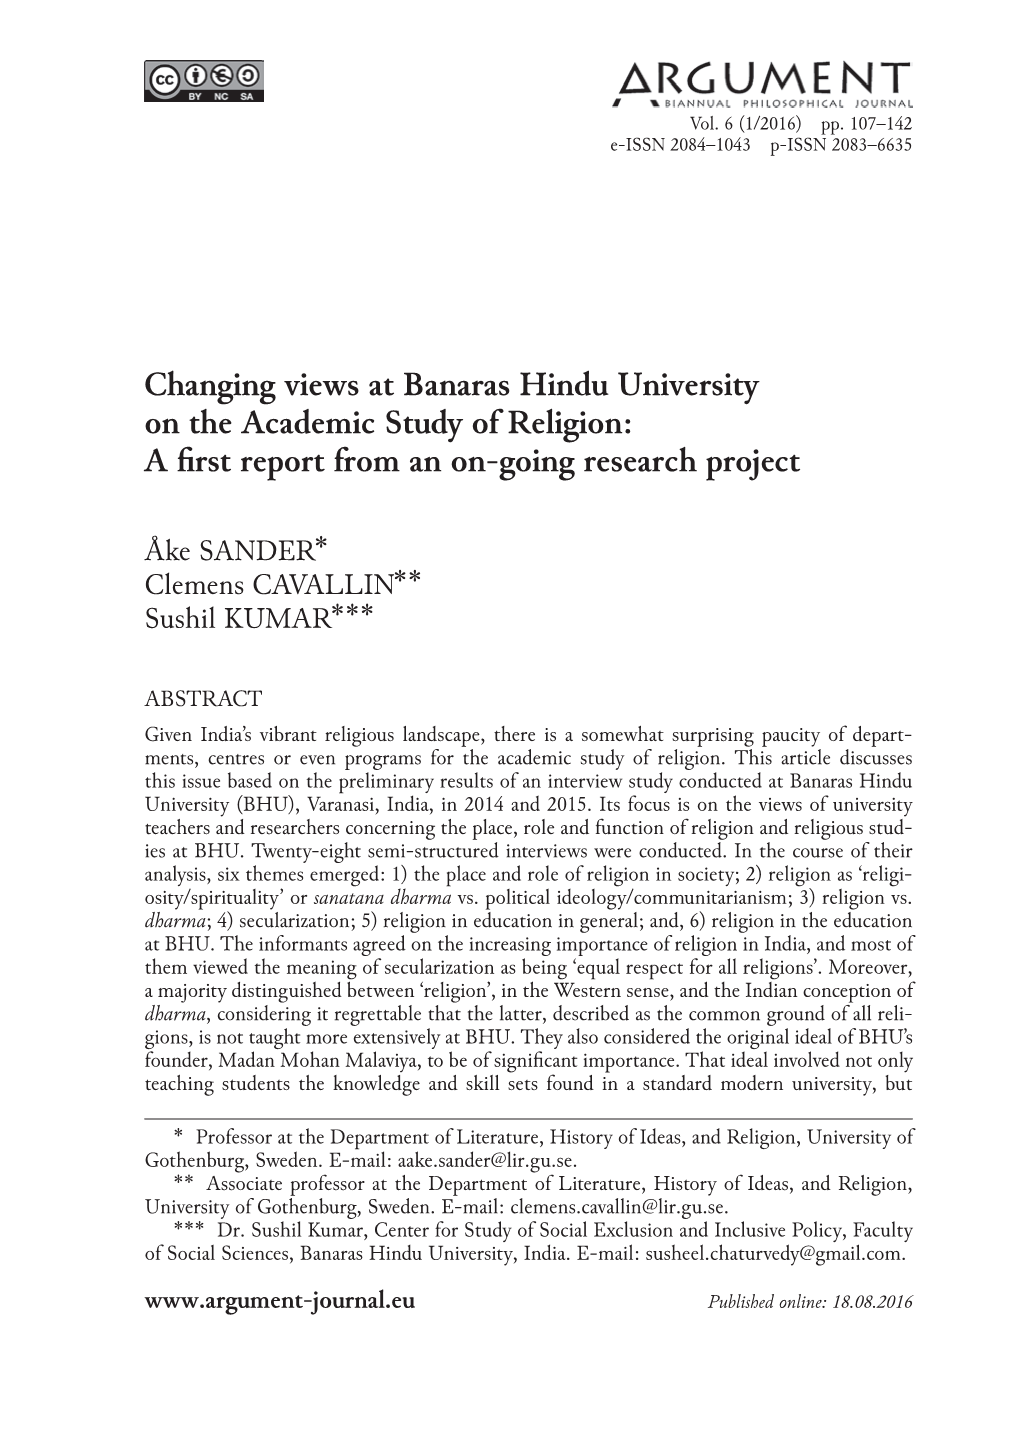 Changing Views at Banaras Hindu University on the Academic Study of Religion: a First Report from an On‑Going­ Research Project